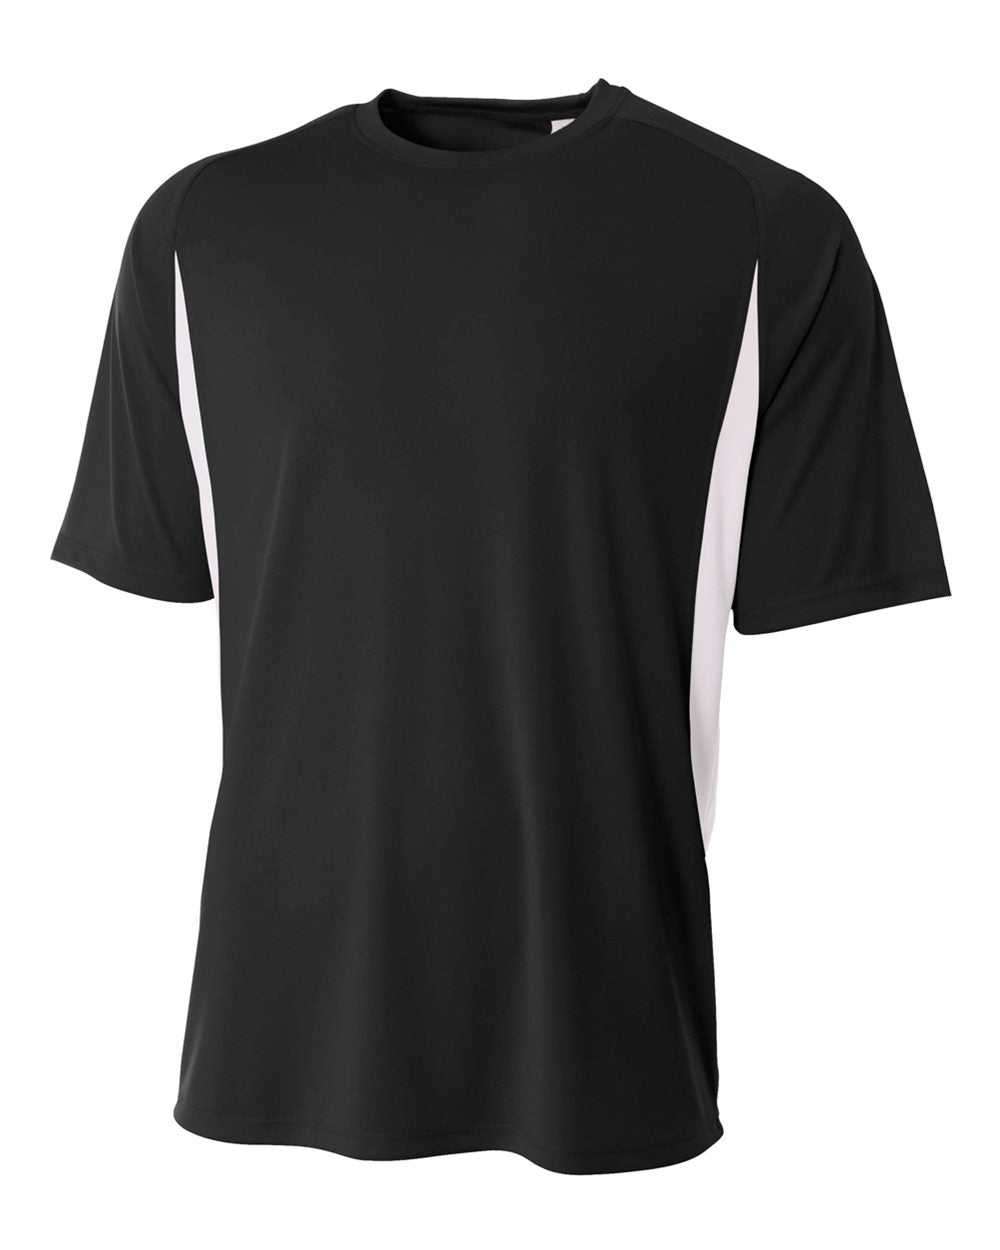 A4 N3181 Cooling Performance Color Blocked Short Sleeve Crew - Black White - HIT a Double